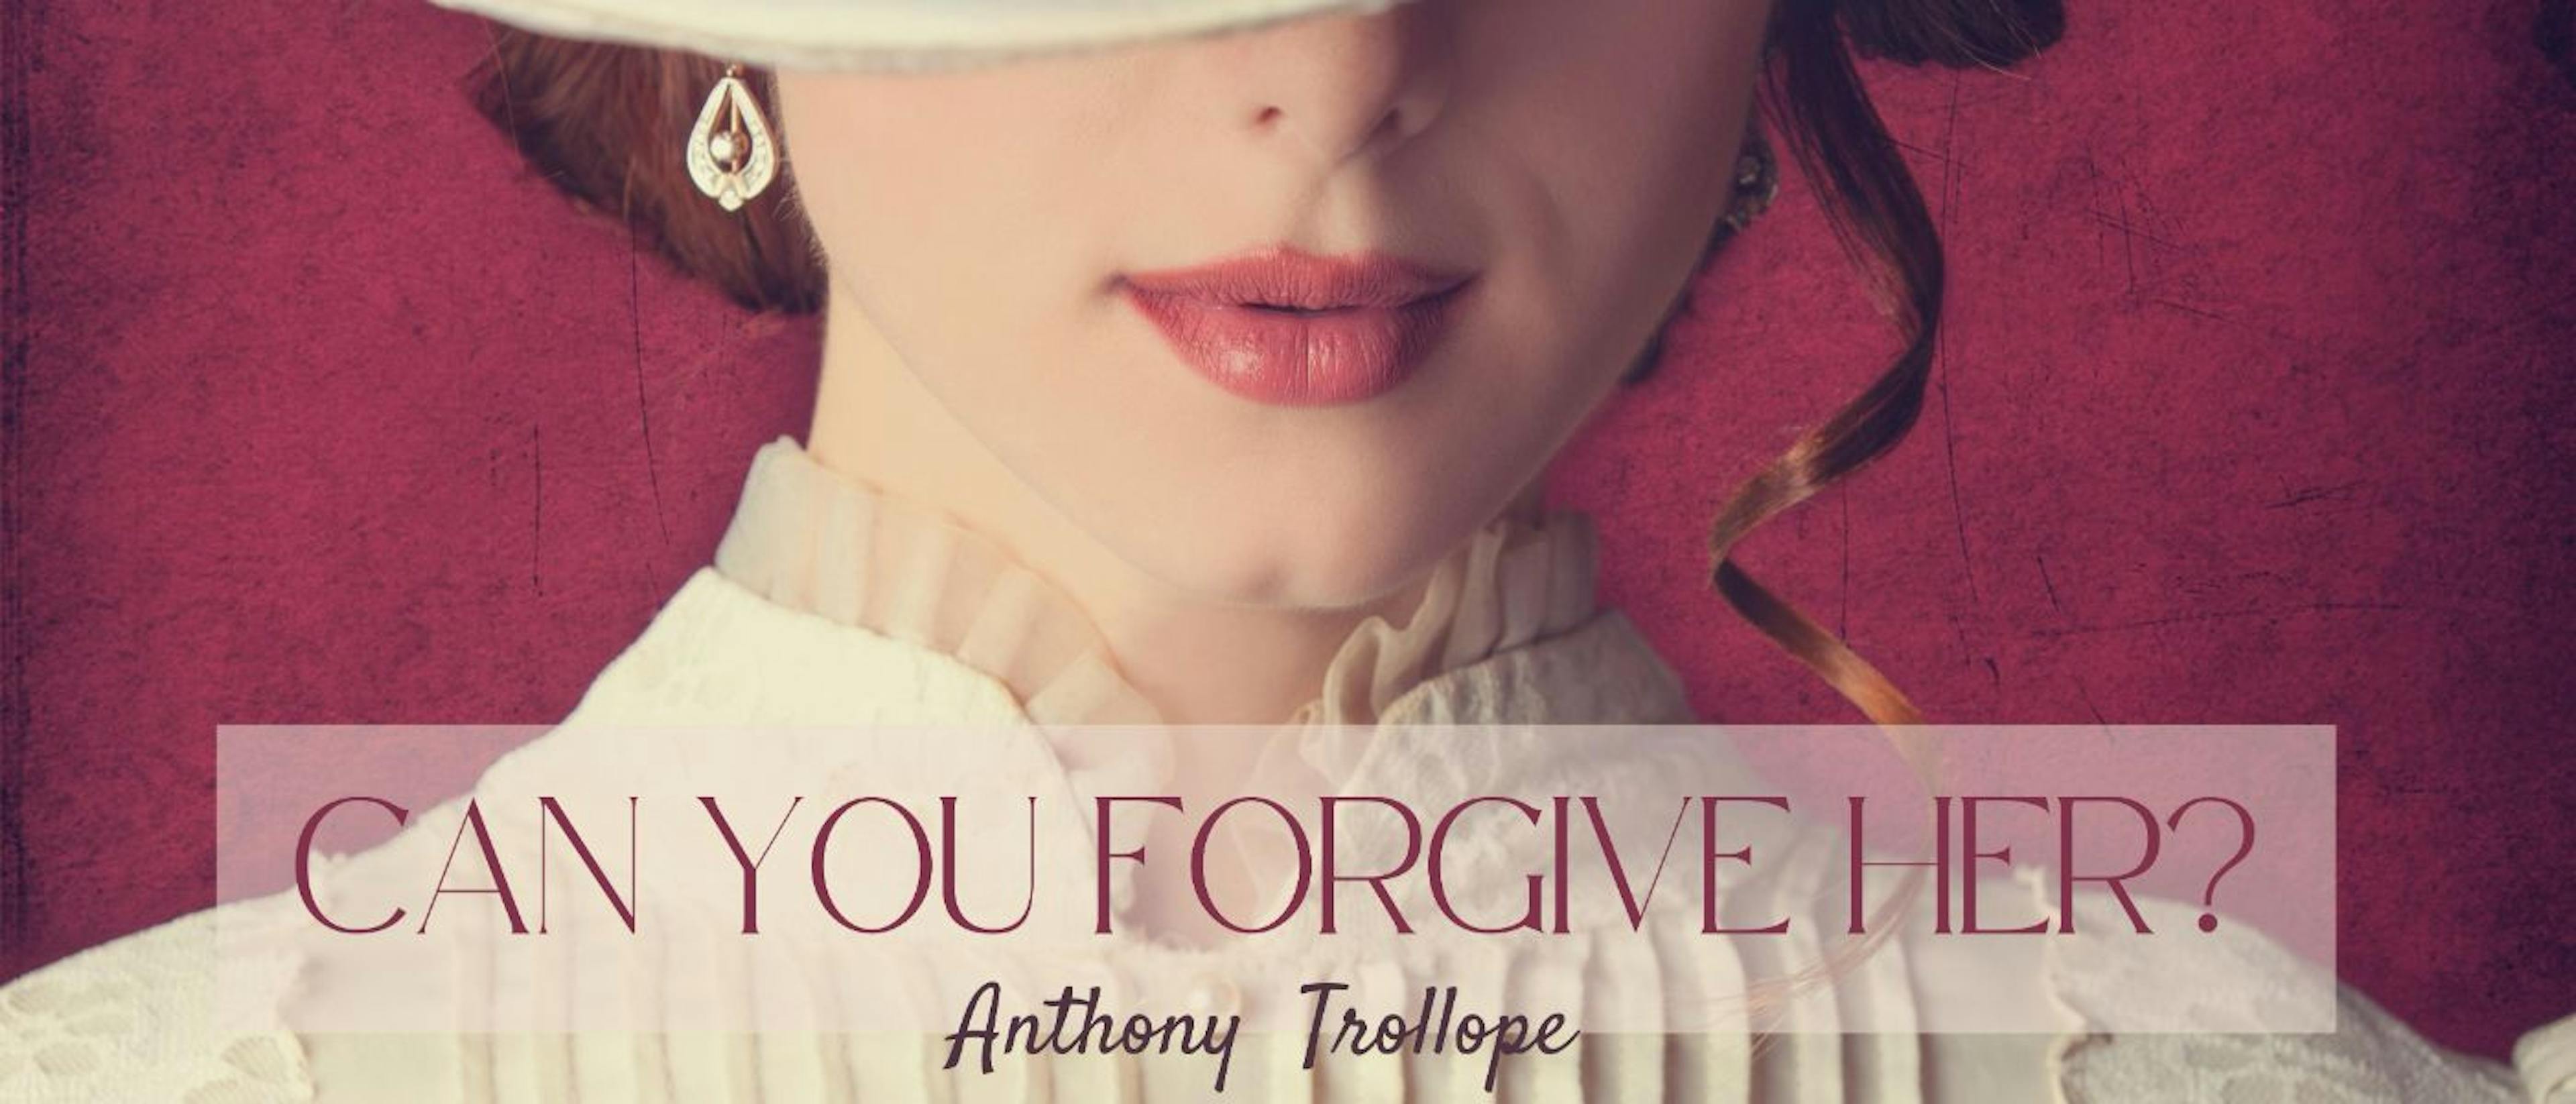 featured image - Can You Forgive Her? by Anthony Trollope - Table of Links